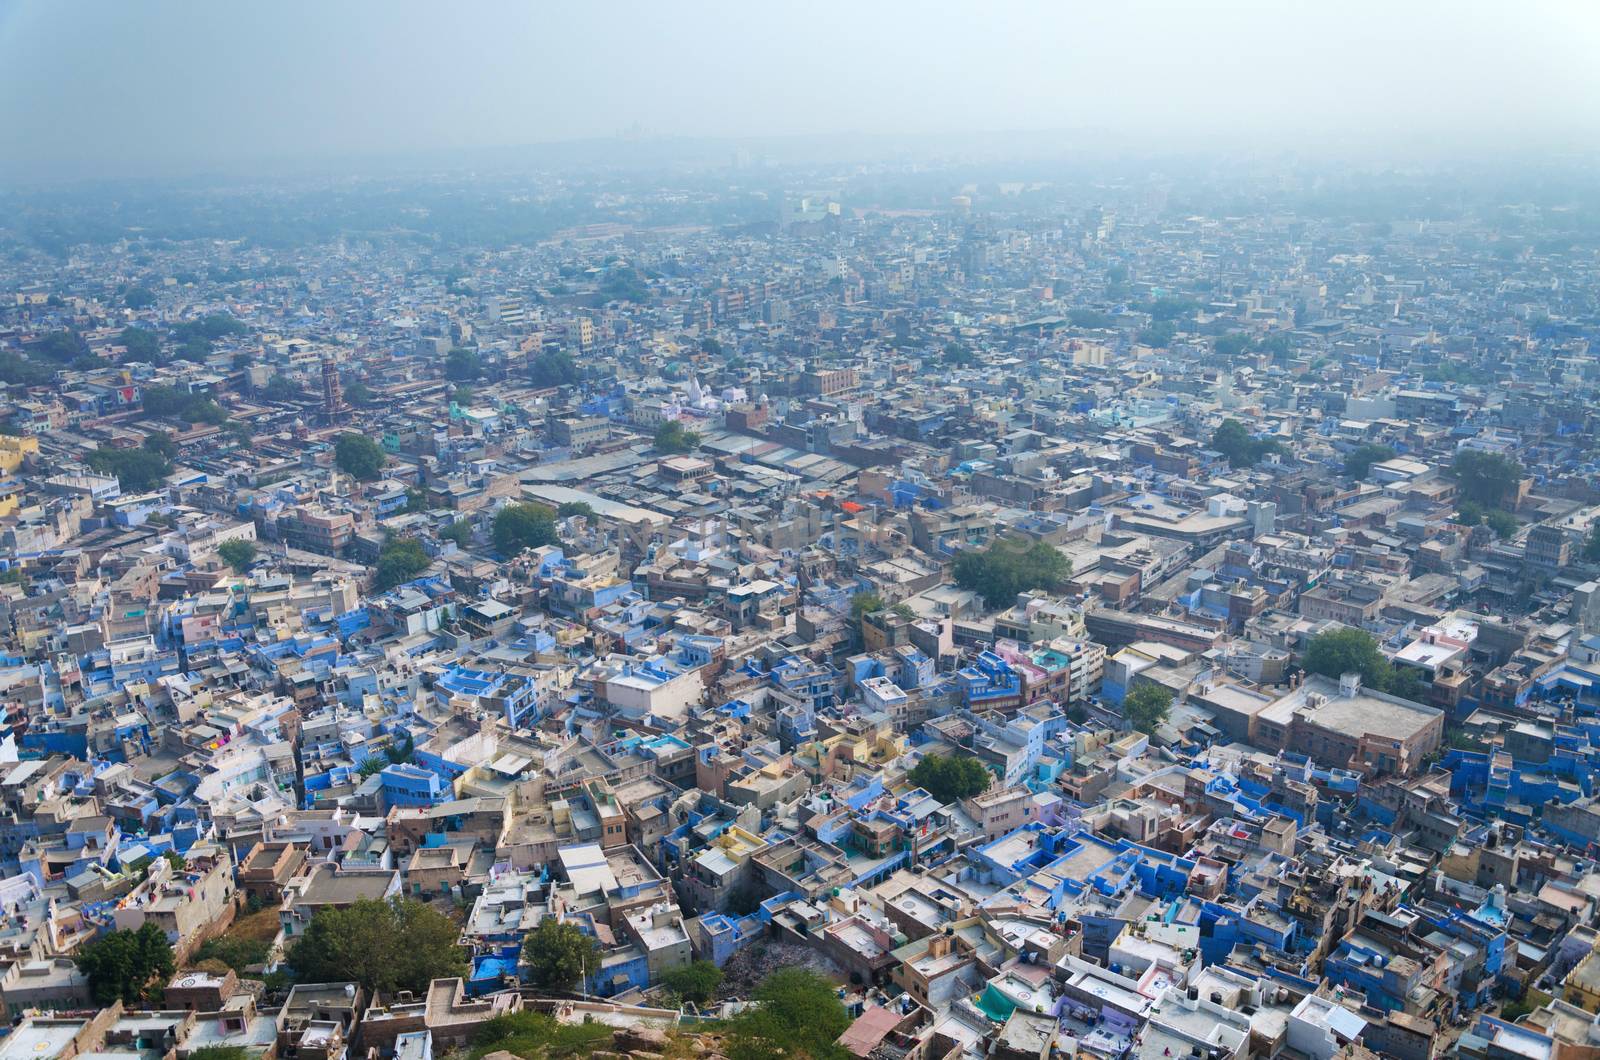 View of Jodhpur, the Blue City, from Mehrangarh Fort, Rajasthan, India 